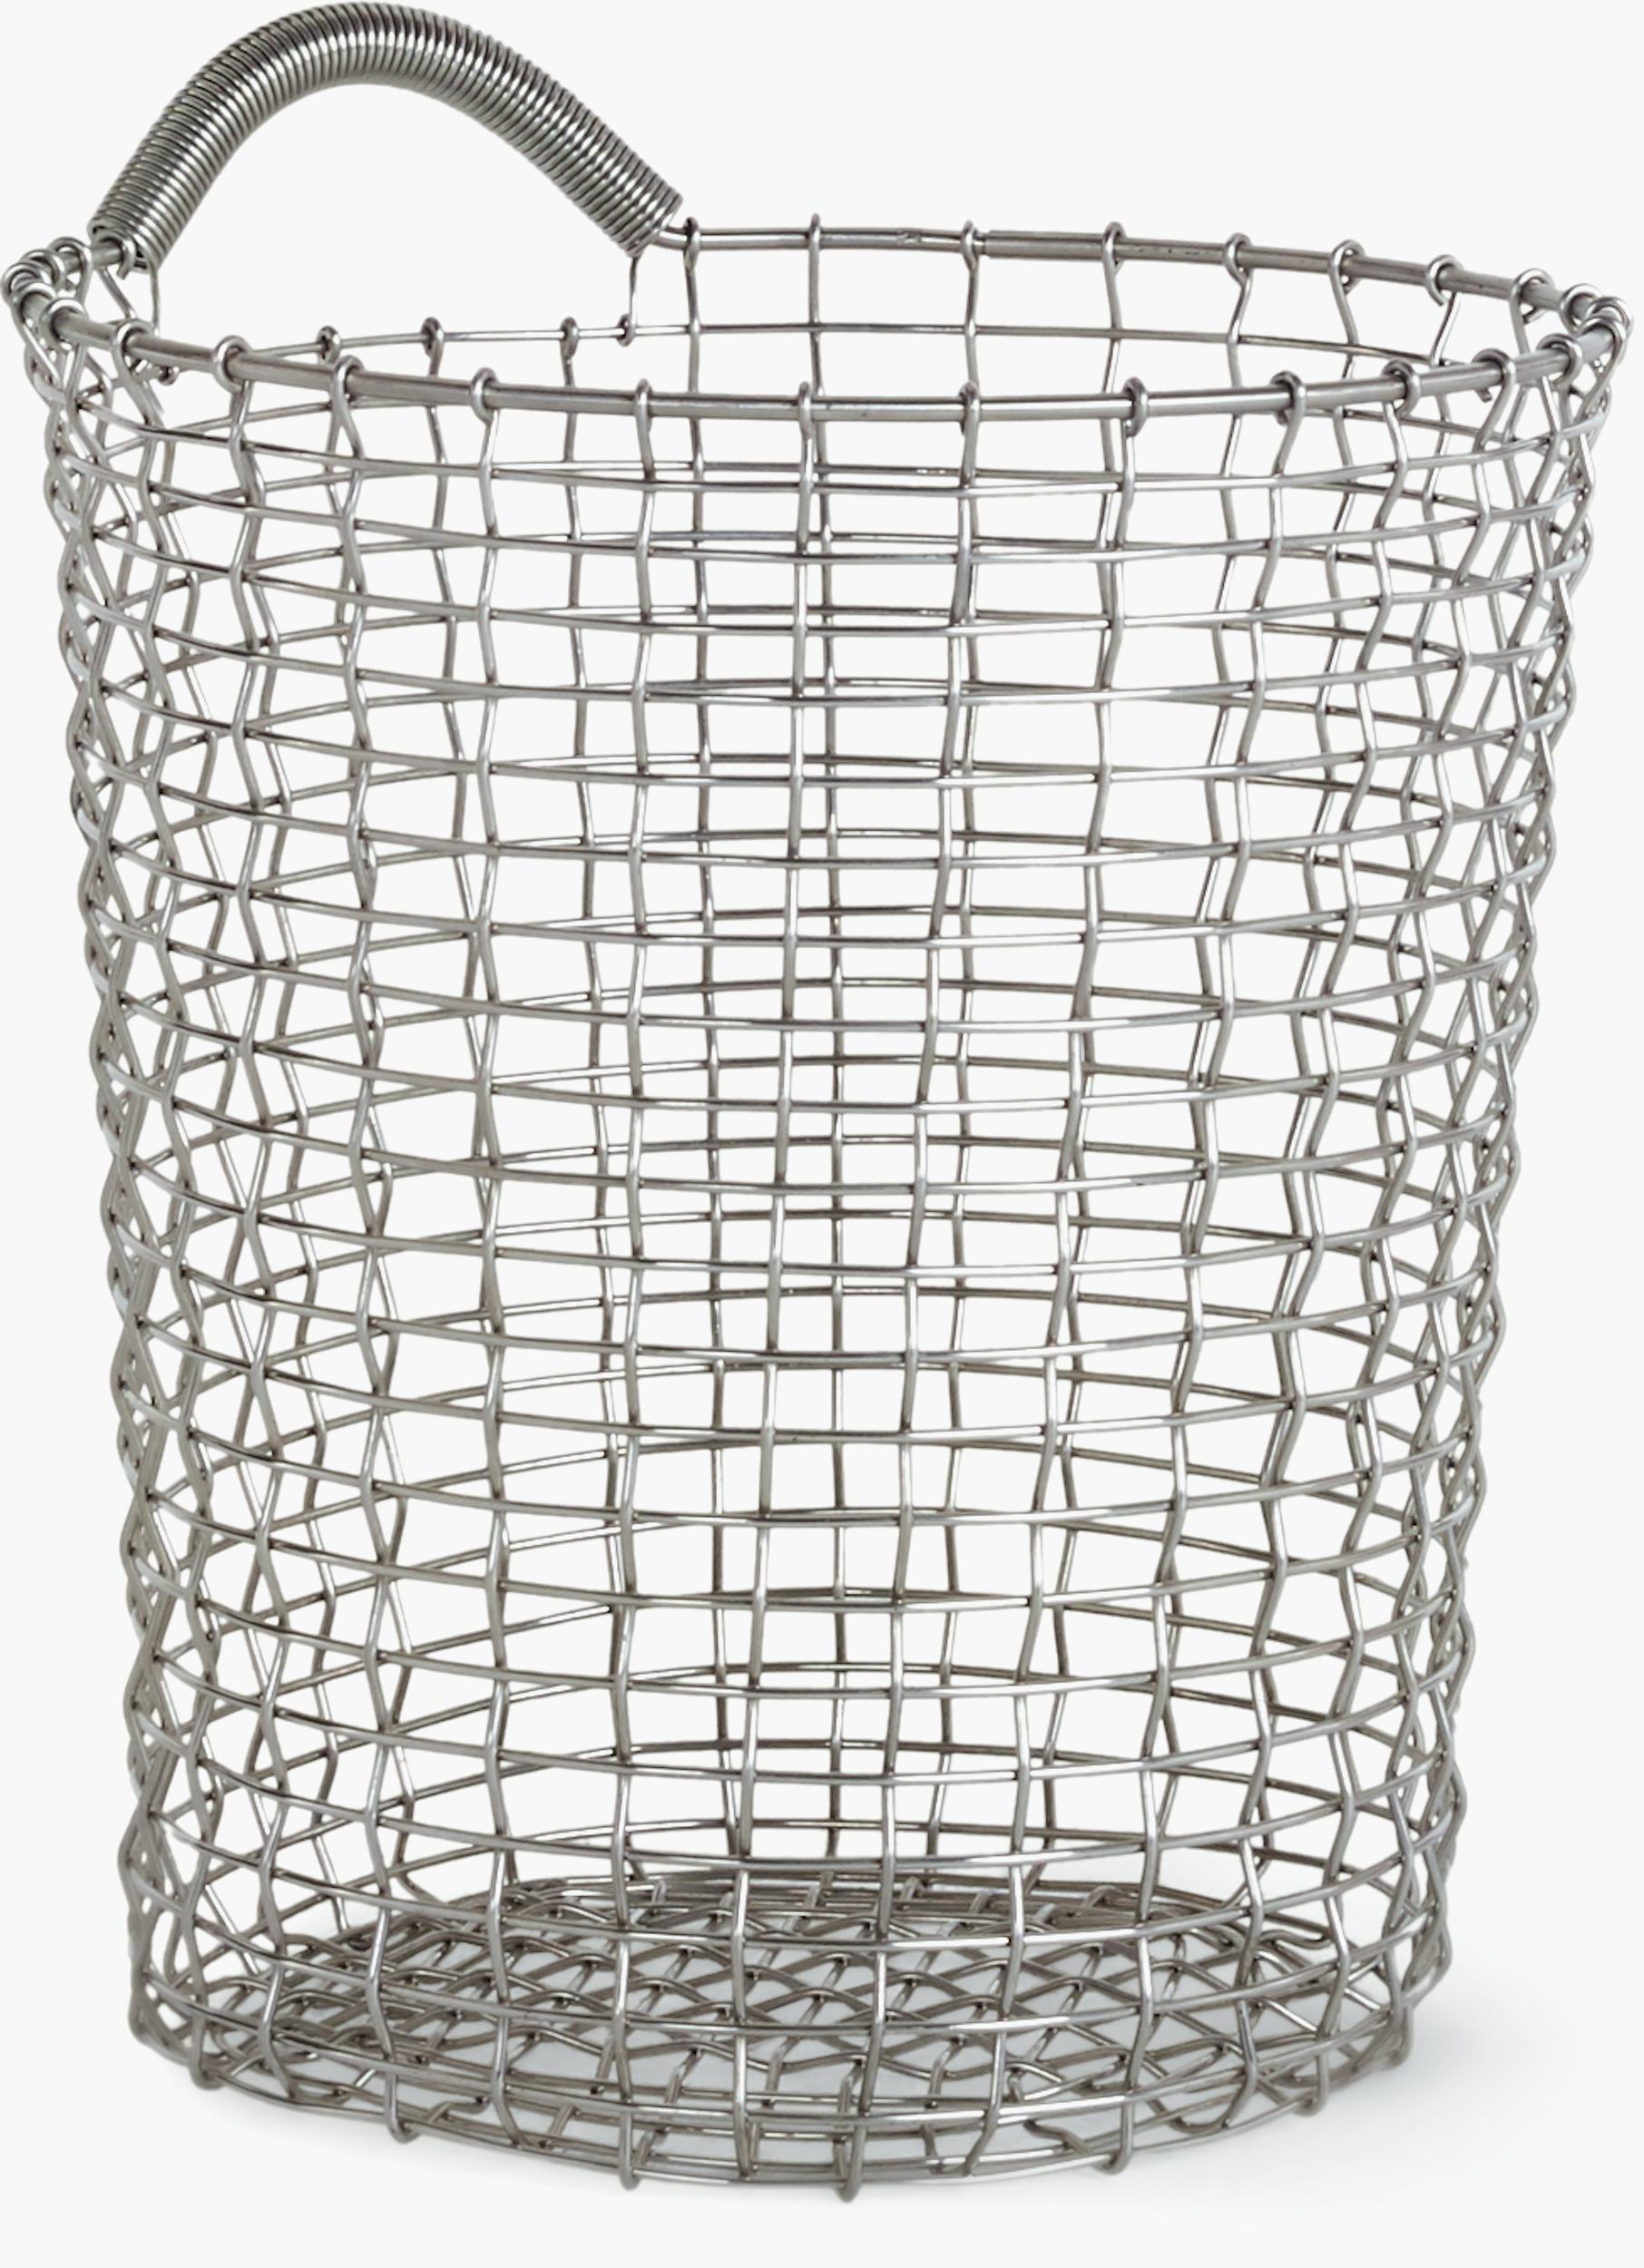 No. 8 Stainless Steel Wire Mesh Basket